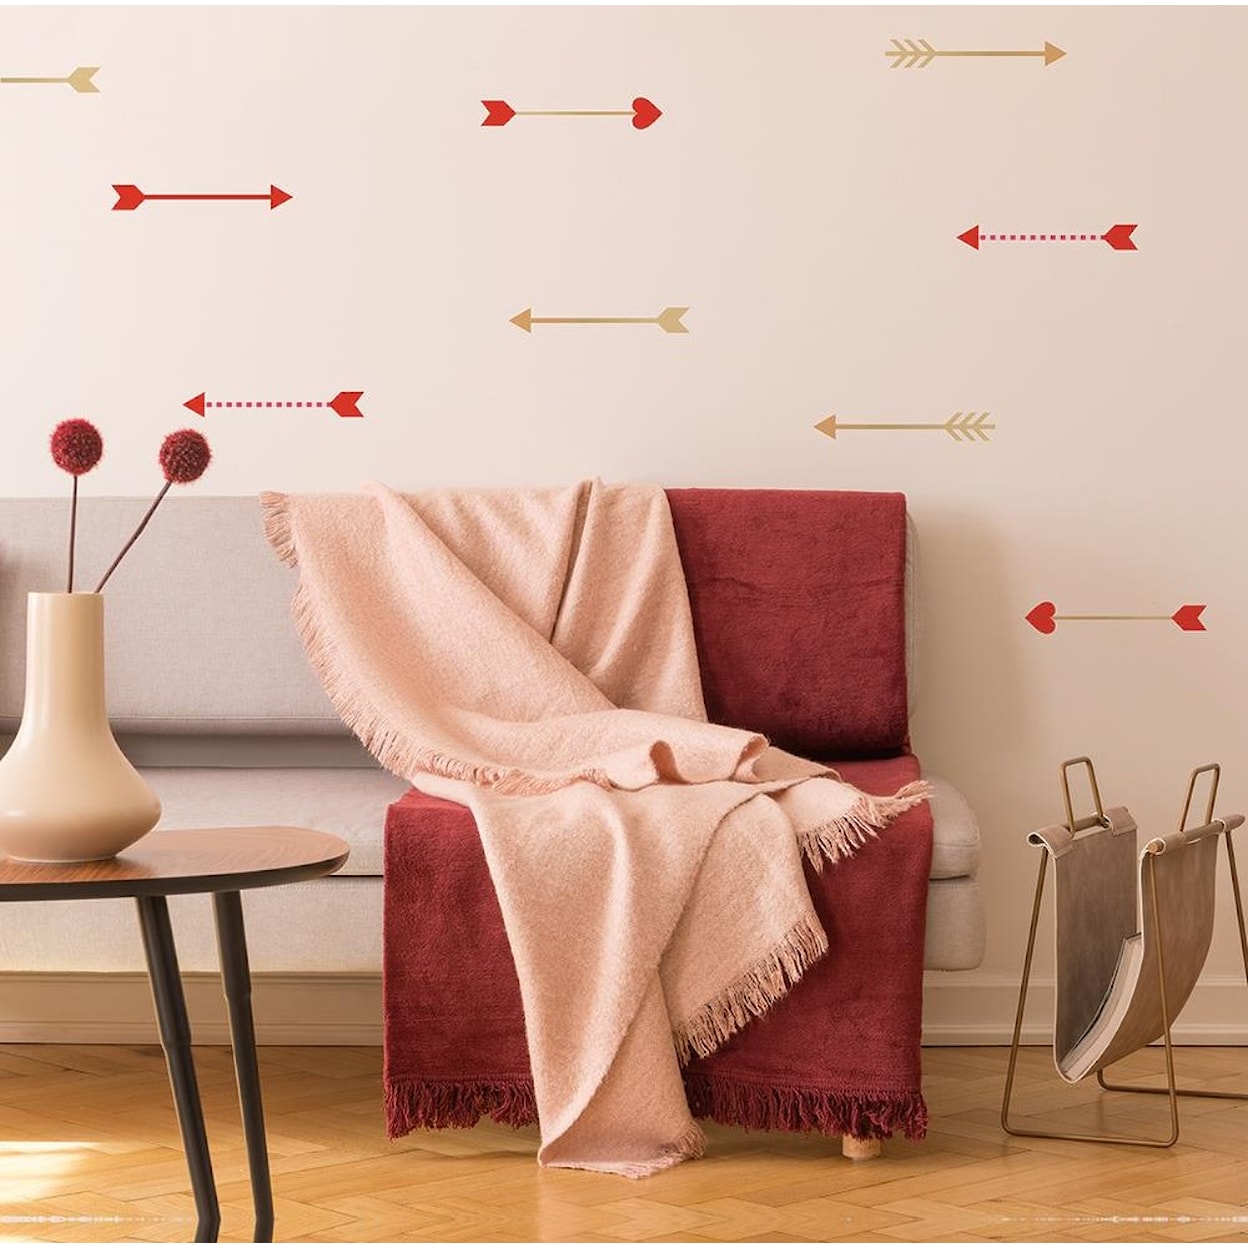 Tempaper Wall Decals Cupid's Arrow Wall Decal